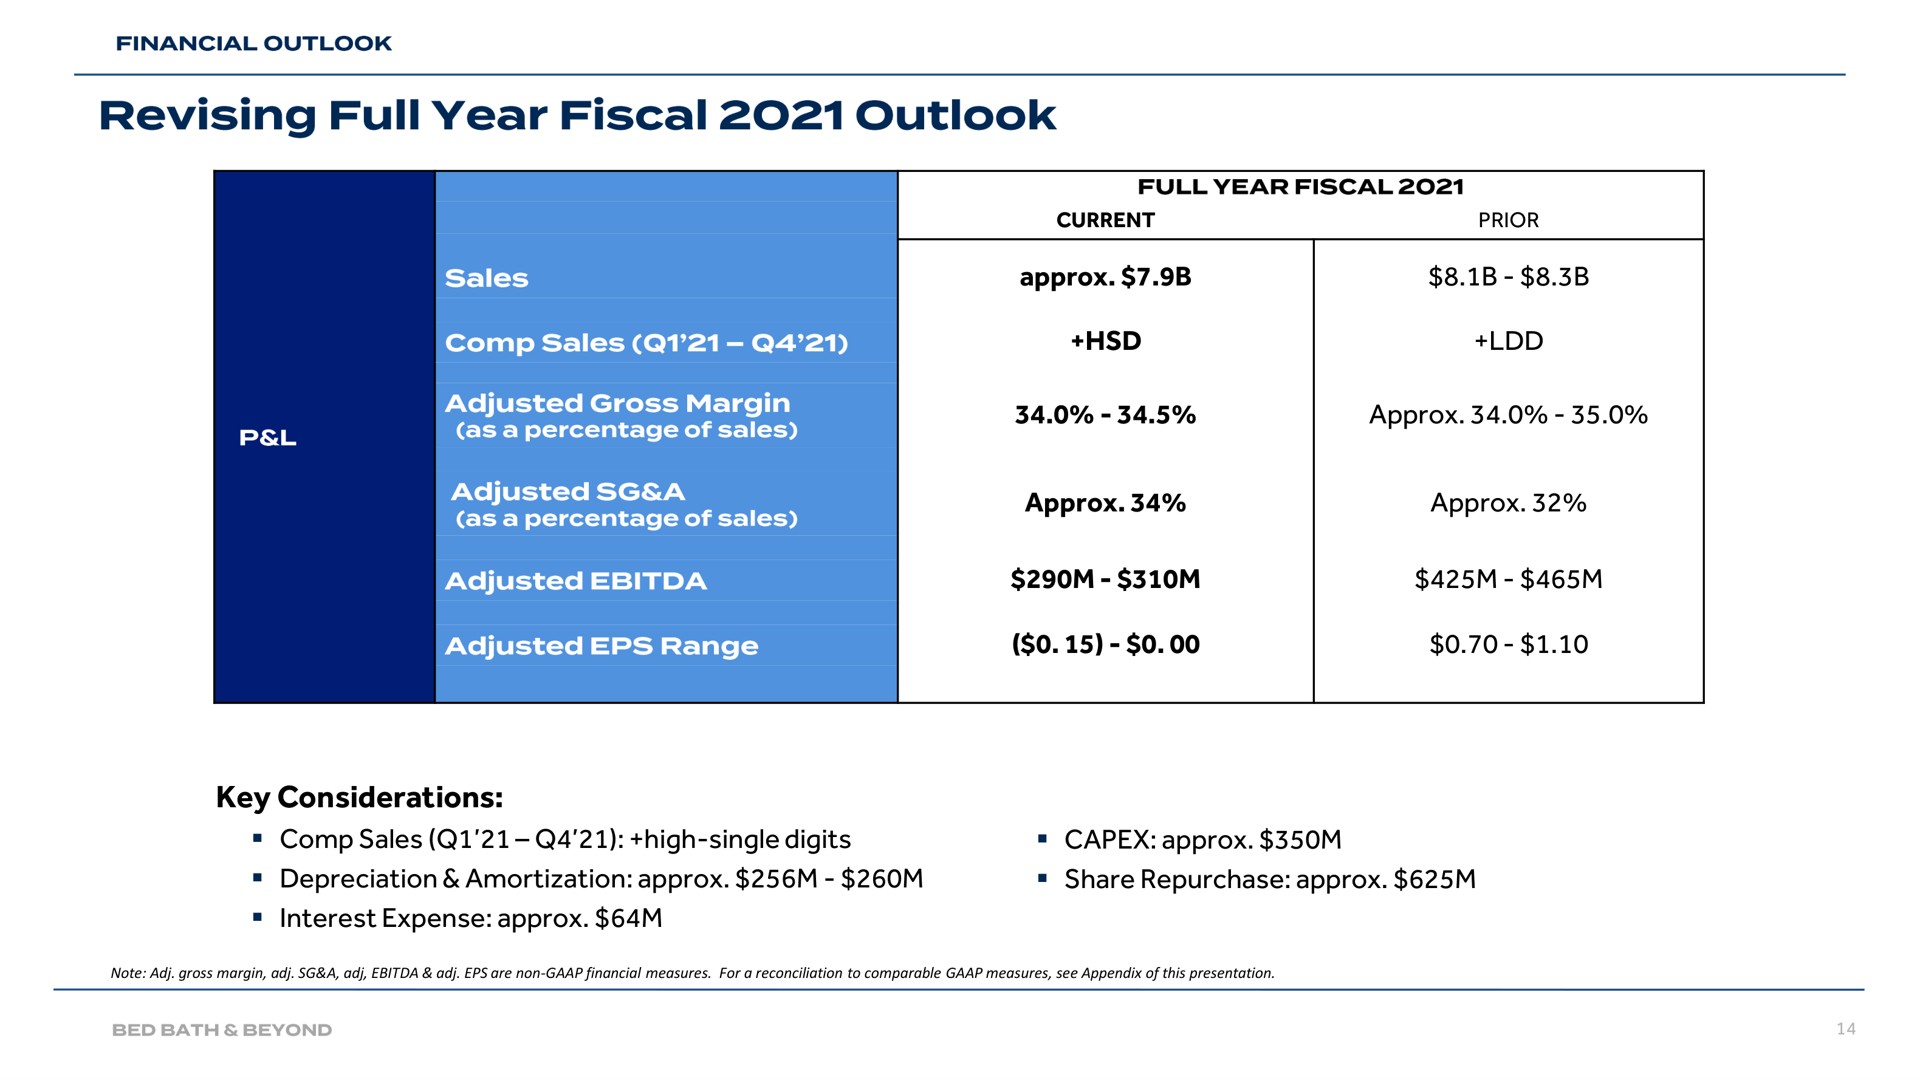 key considerations capital allocation revising full year fiscal outlook | Bed Bath & Beyond